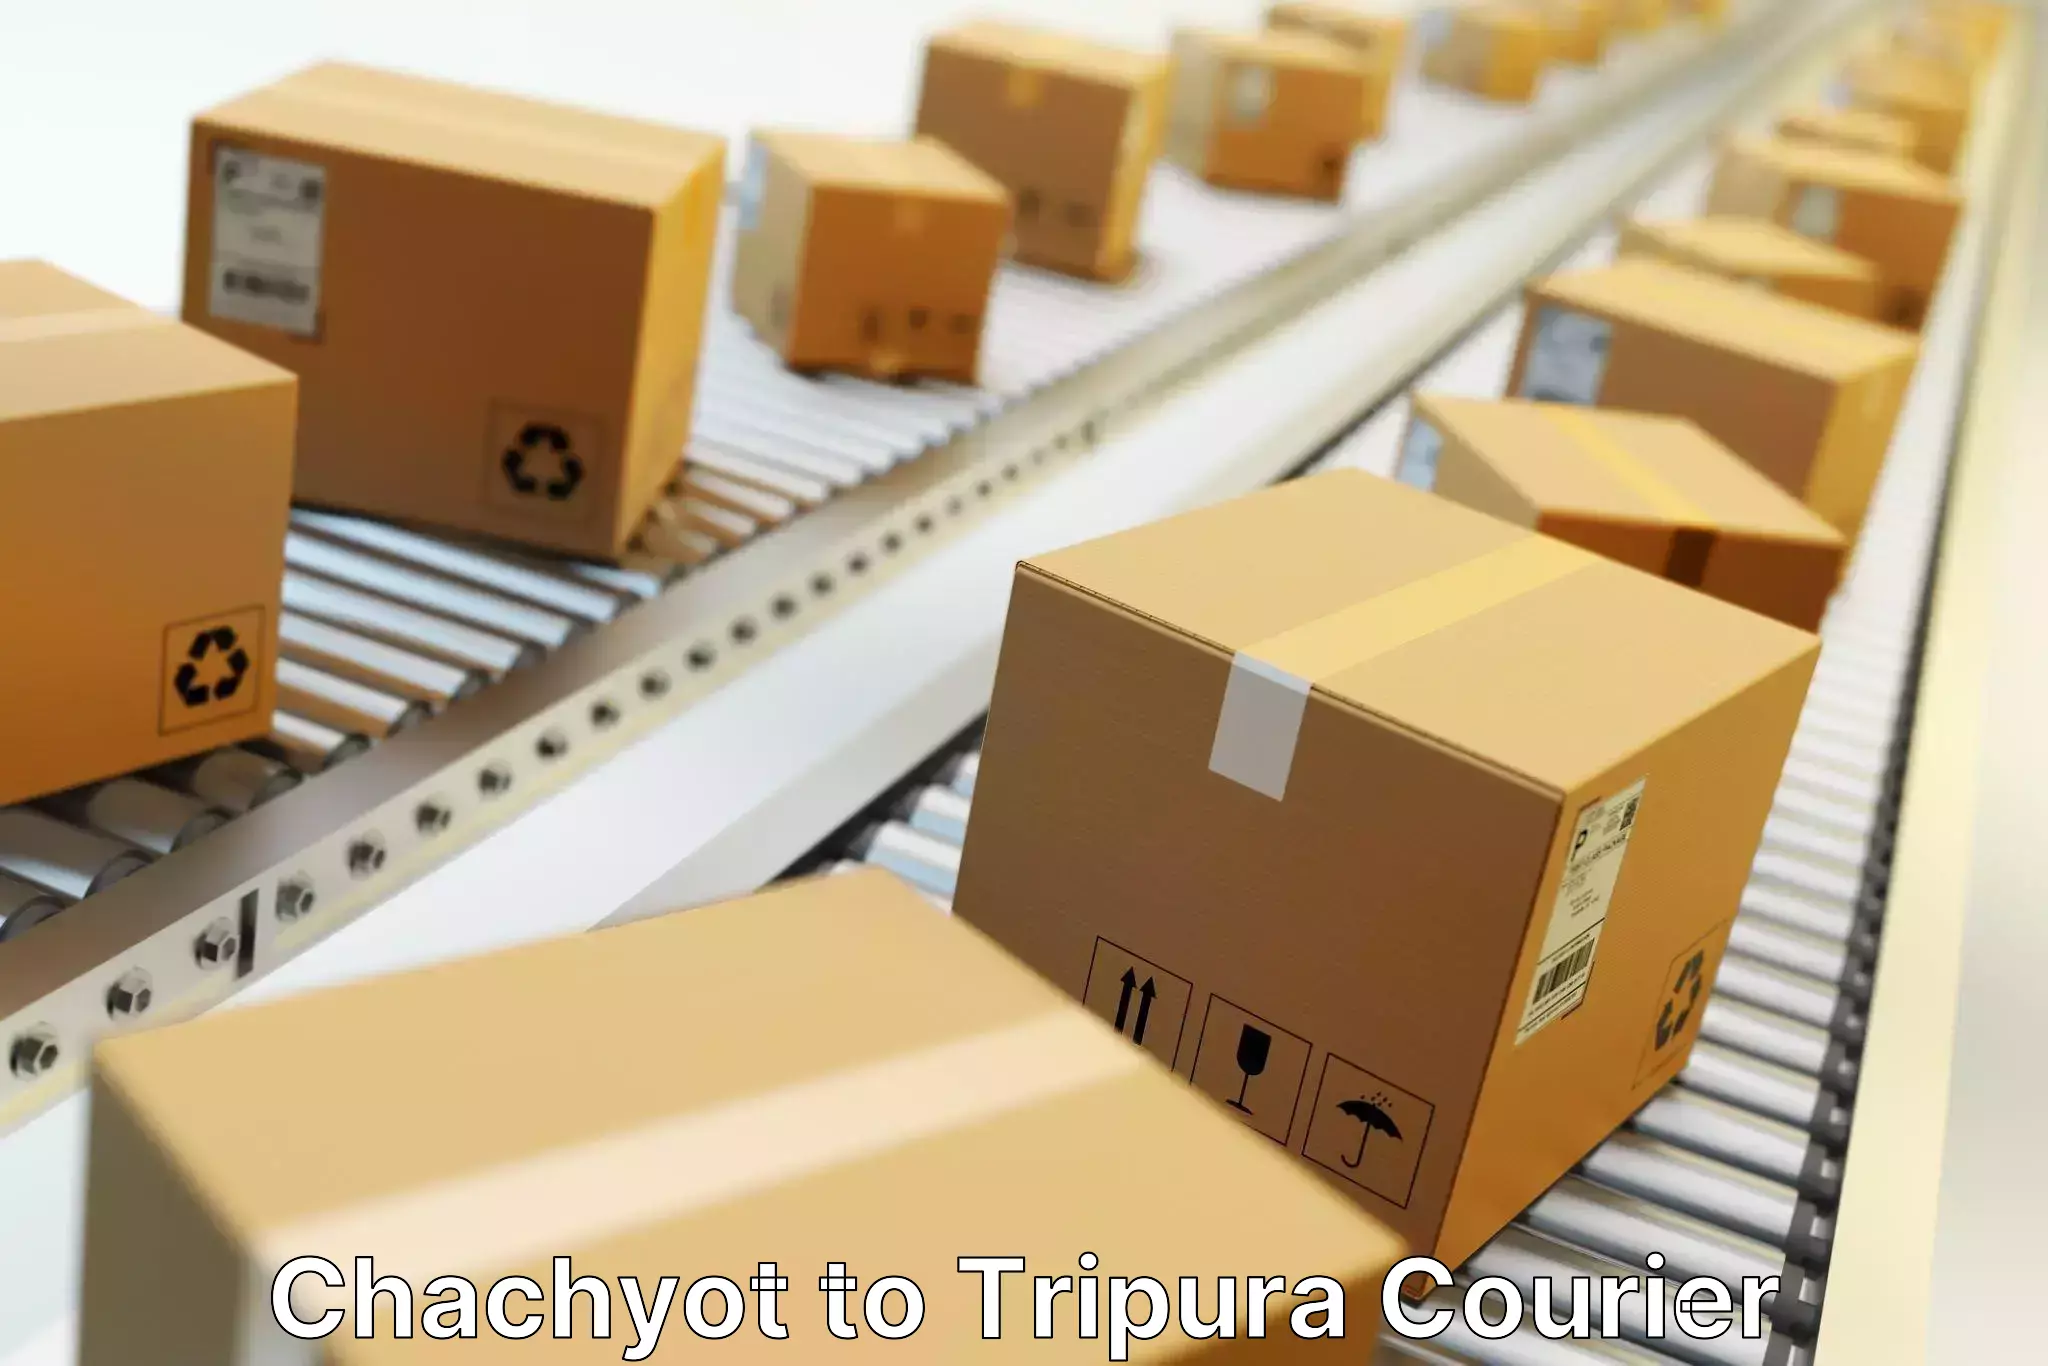 24-hour delivery options Chachyot to Udaipur Tripura